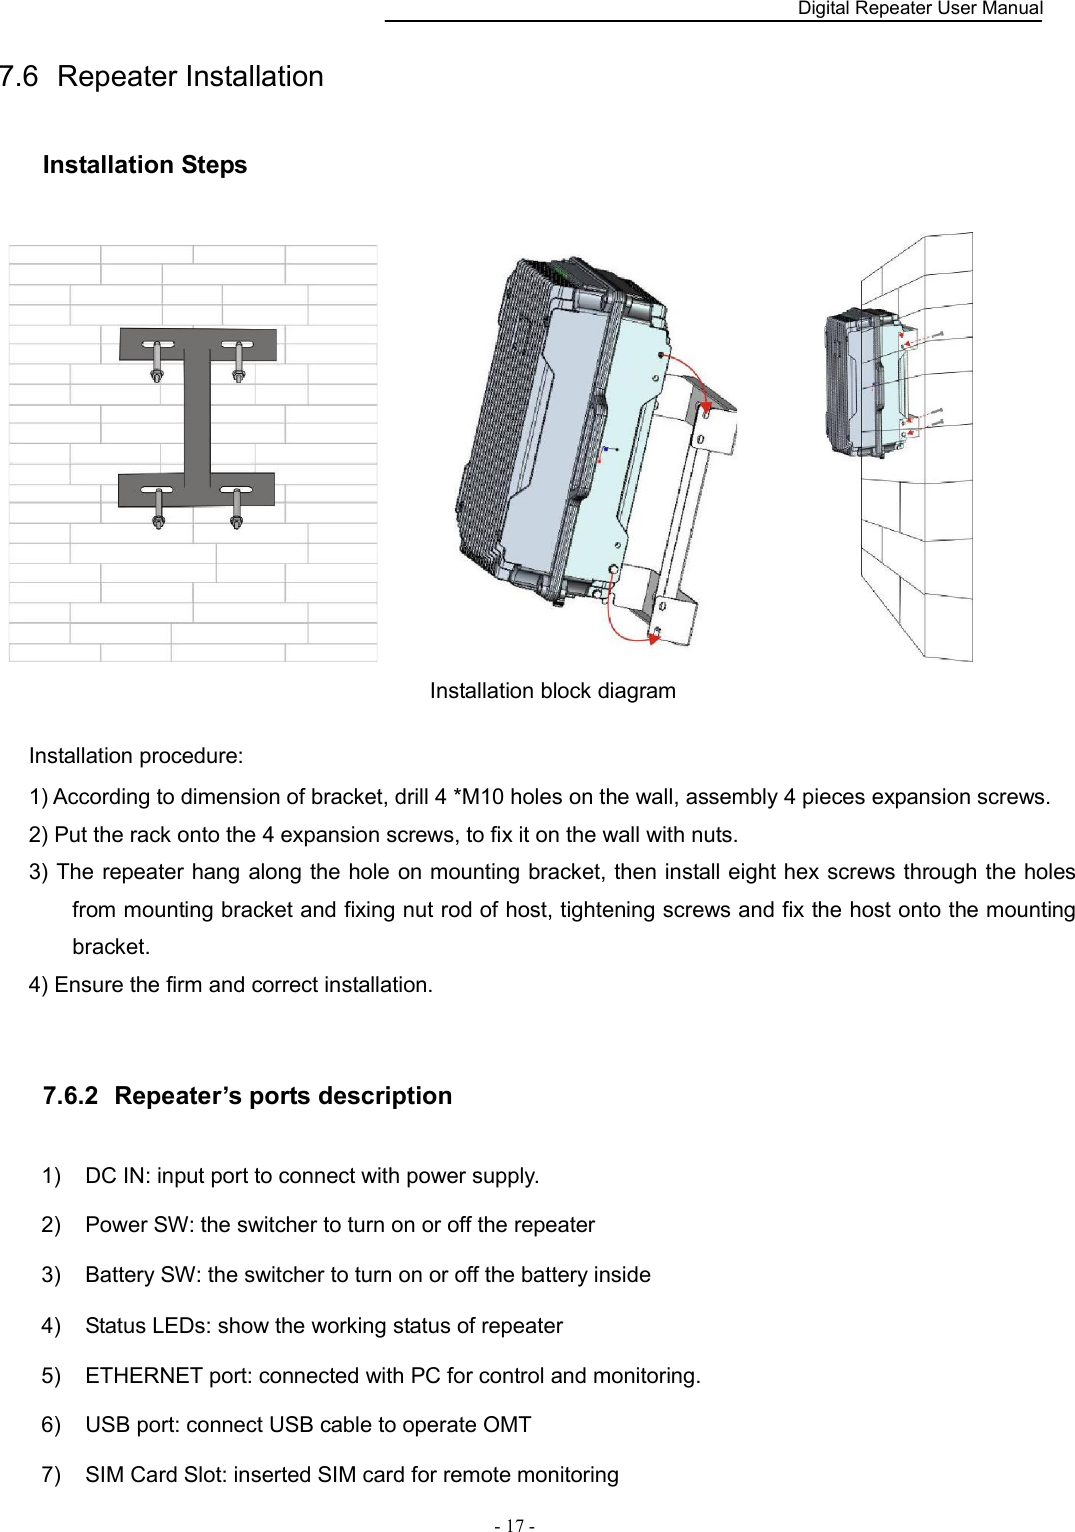    Digital Repeater User Manual  - 17 -   7.6  Repeater Installation Installation Steps                        Installation block diagram  Installation procedure: 1) According to dimension of bracket, drill 4 *M10 holes on the wall, assembly 4 pieces expansion screws. 2) Put the rack onto the 4 expansion screws, to fix it on the wall with nuts. 3) The repeater hang along the hole on mounting bracket, then install eight hex screws through the holes from mounting bracket and fixing nut rod of host, tightening screws and fix the host onto the mounting bracket. 4) Ensure the firm and correct installation.  7.6.2   Repeater’s ports description 1)  DC IN: input port to connect with power supply. 2)  Power SW: the switcher to turn on or off the repeater 3)  Battery SW: the switcher to turn on or off the battery inside 4)  Status LEDs: show the working status of repeater 5)  ETHERNET port: connected with PC for control and monitoring. 6)  USB port: connect USB cable to operate OMT   7)  SIM Card Slot: inserted SIM card for remote monitoring 